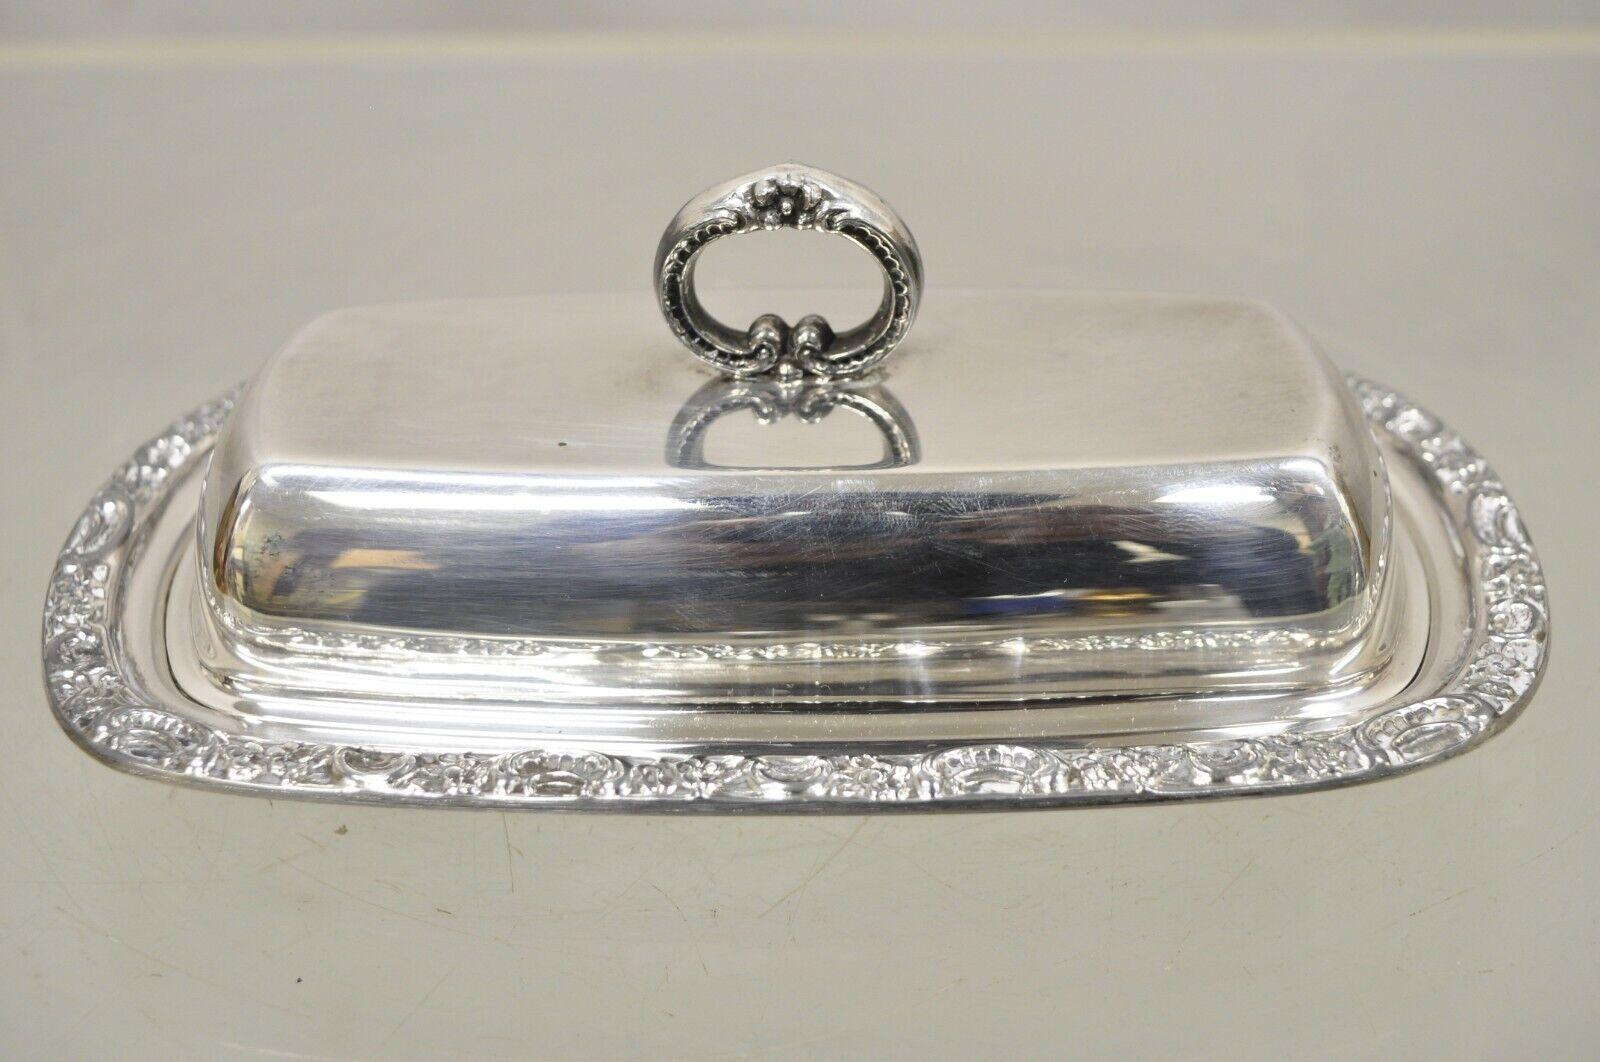 Vintage Newport Silver Plated Covered Butter Dish Tray with Lid 3